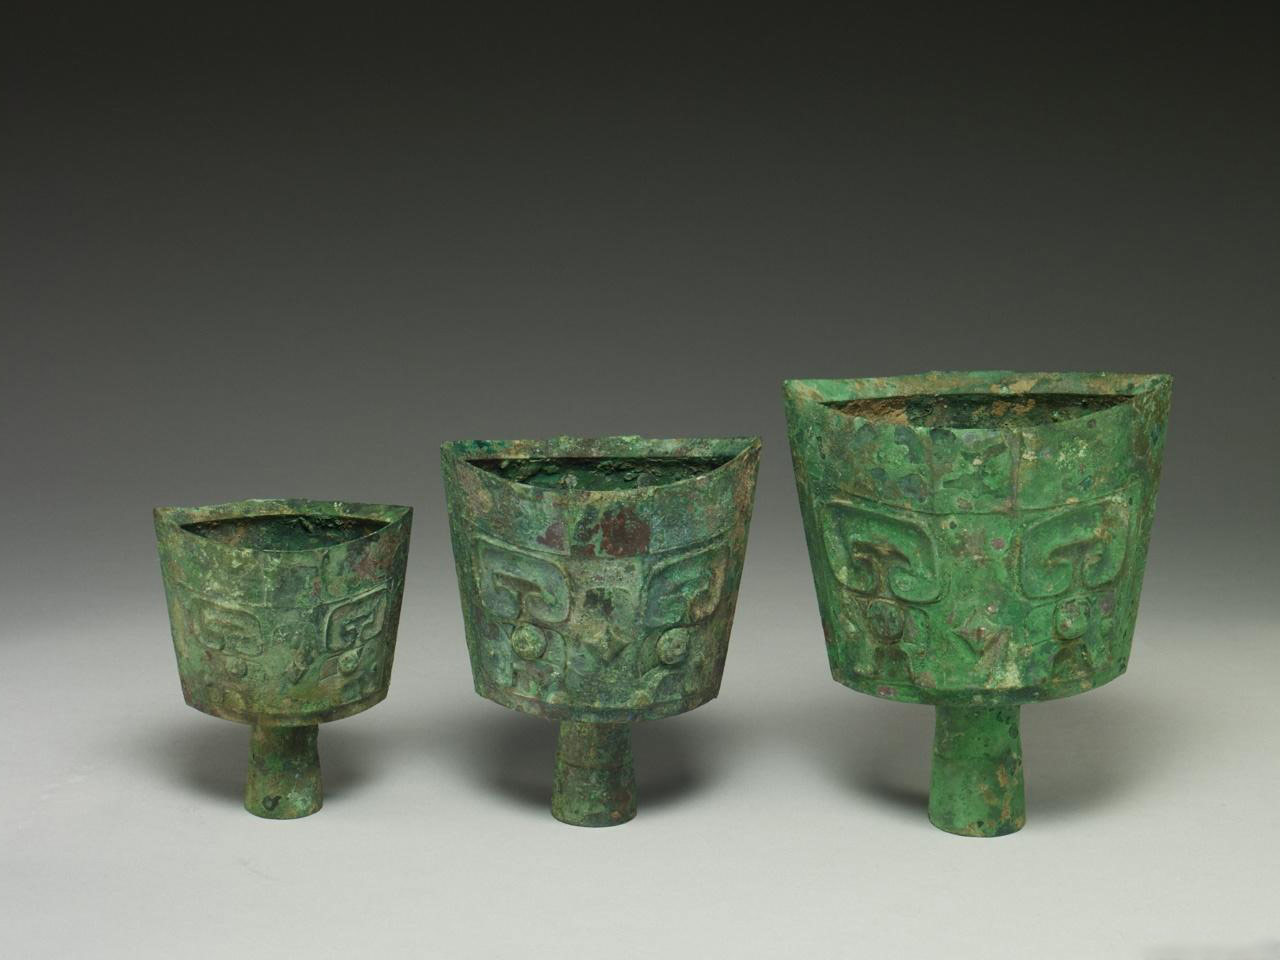 Nao bells with animal mask pattern, Late Shang Dynasty